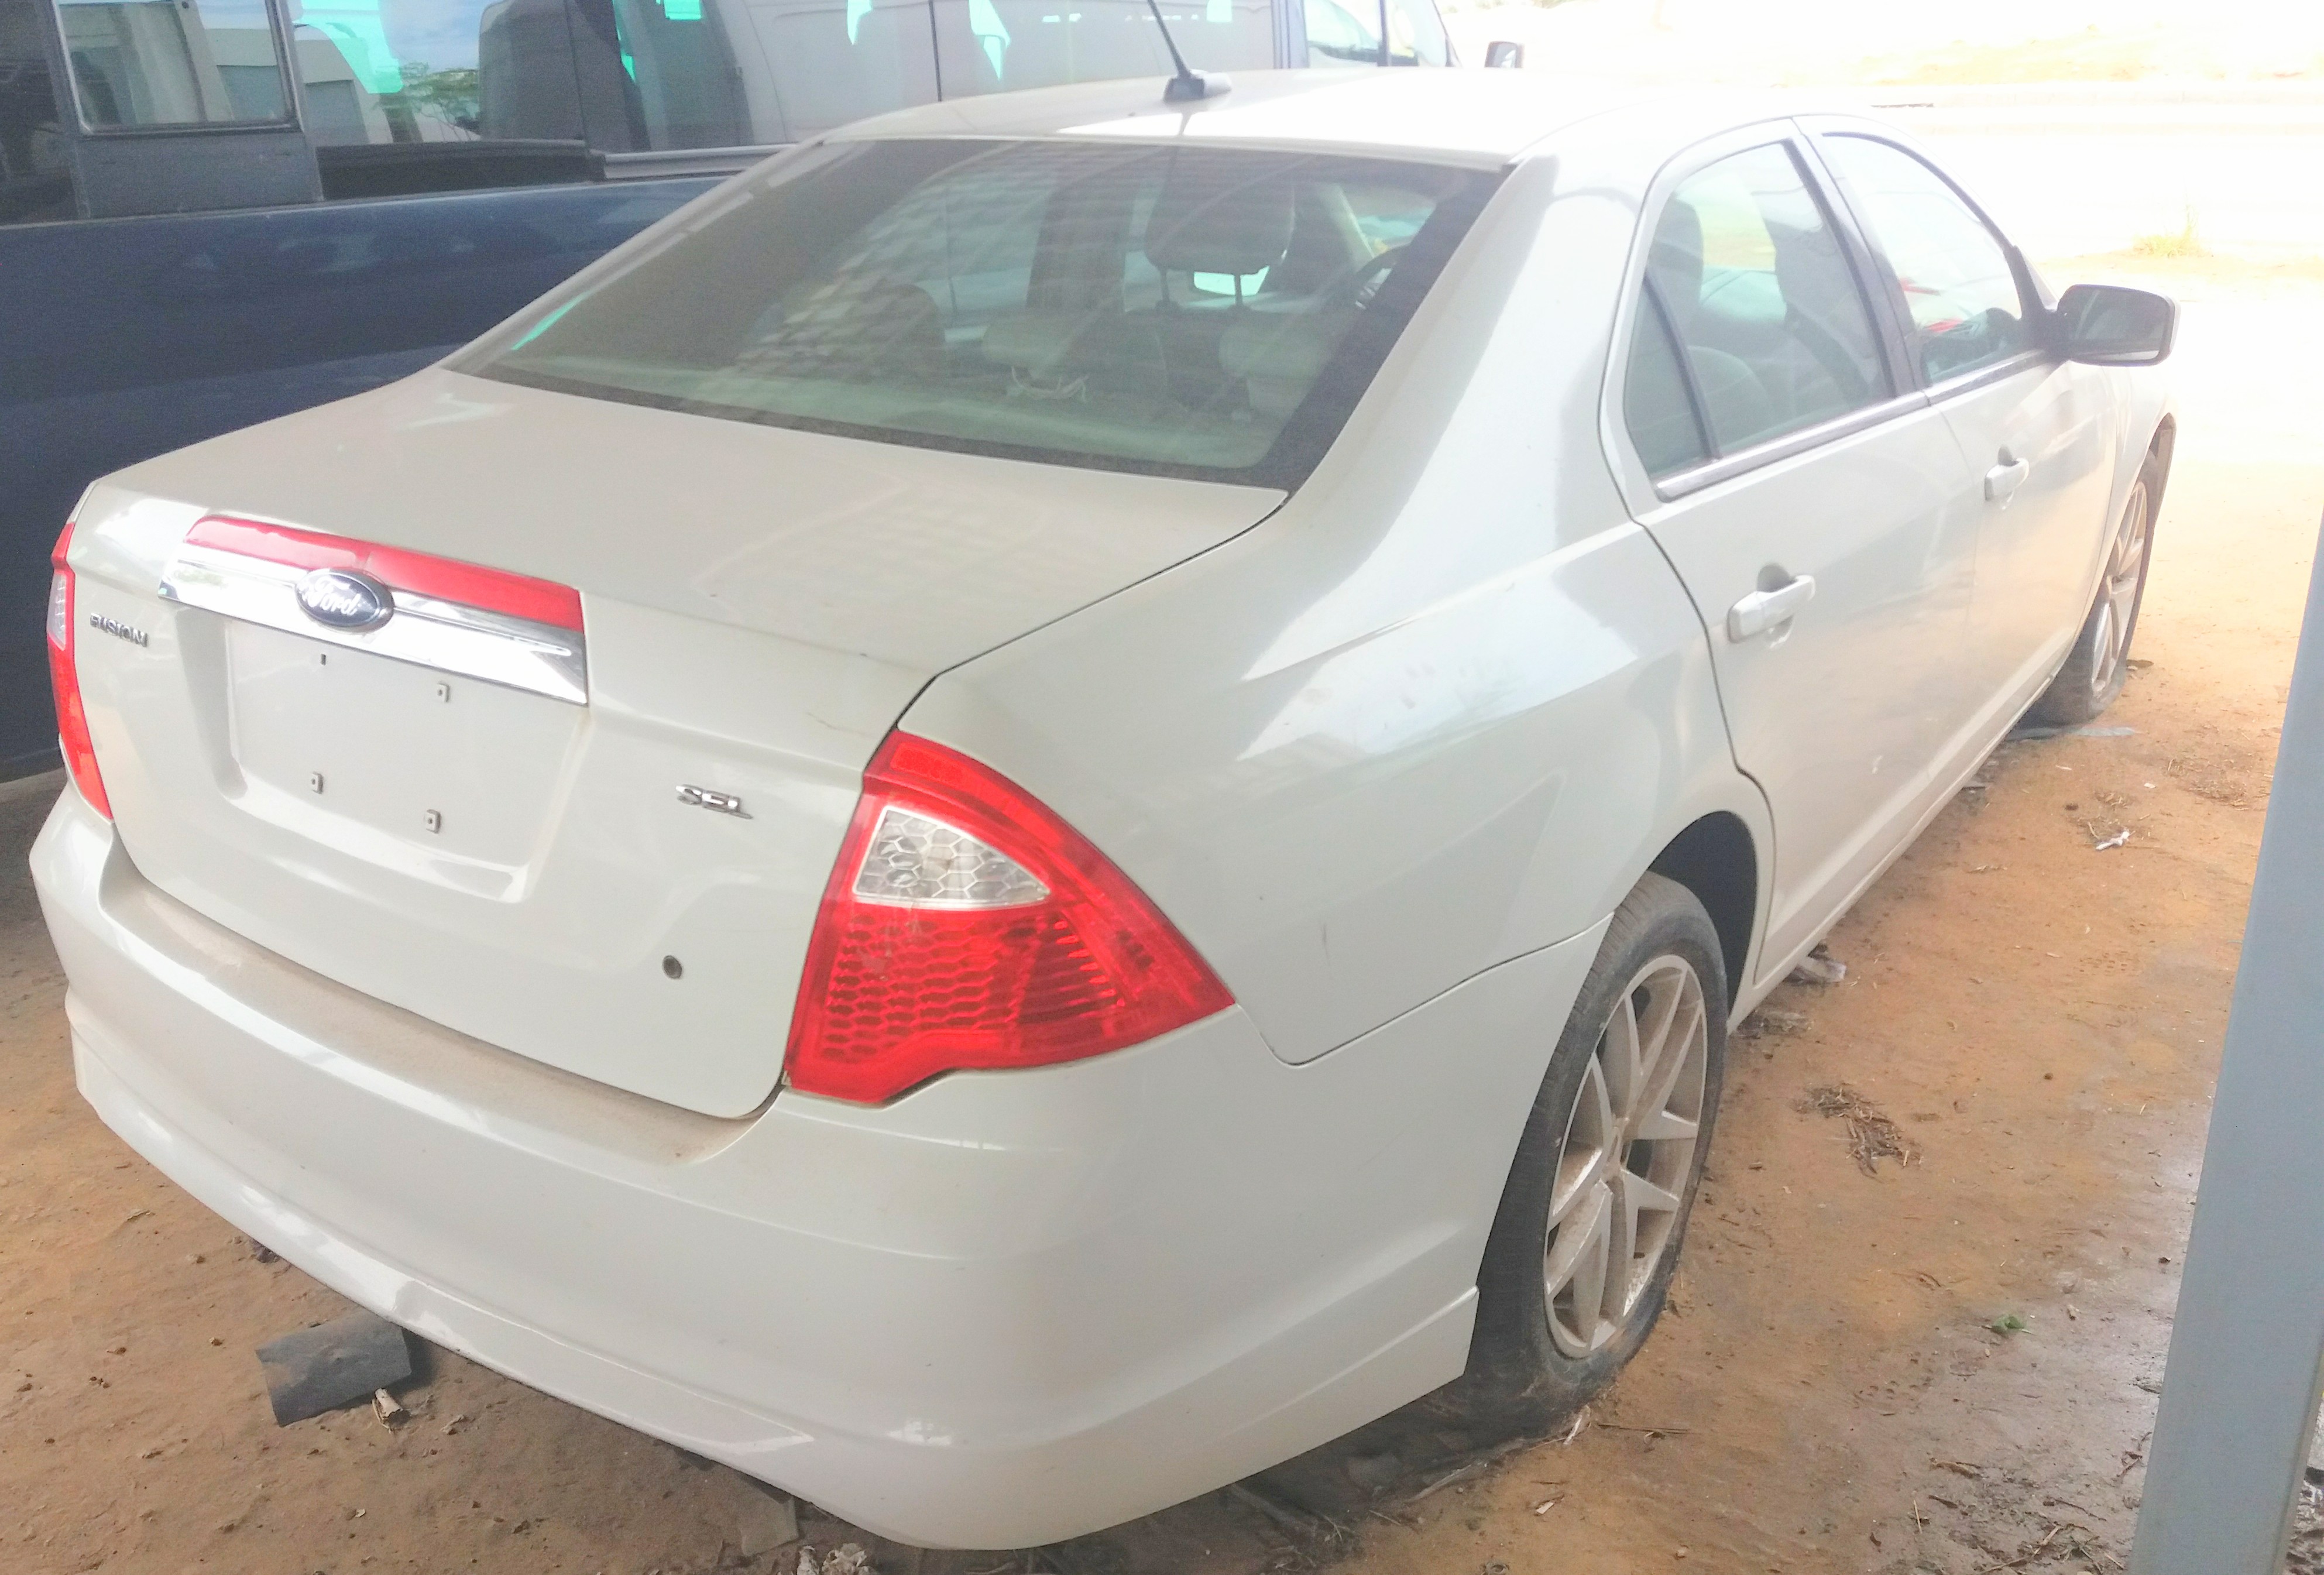 Ford Fusion 2012 0